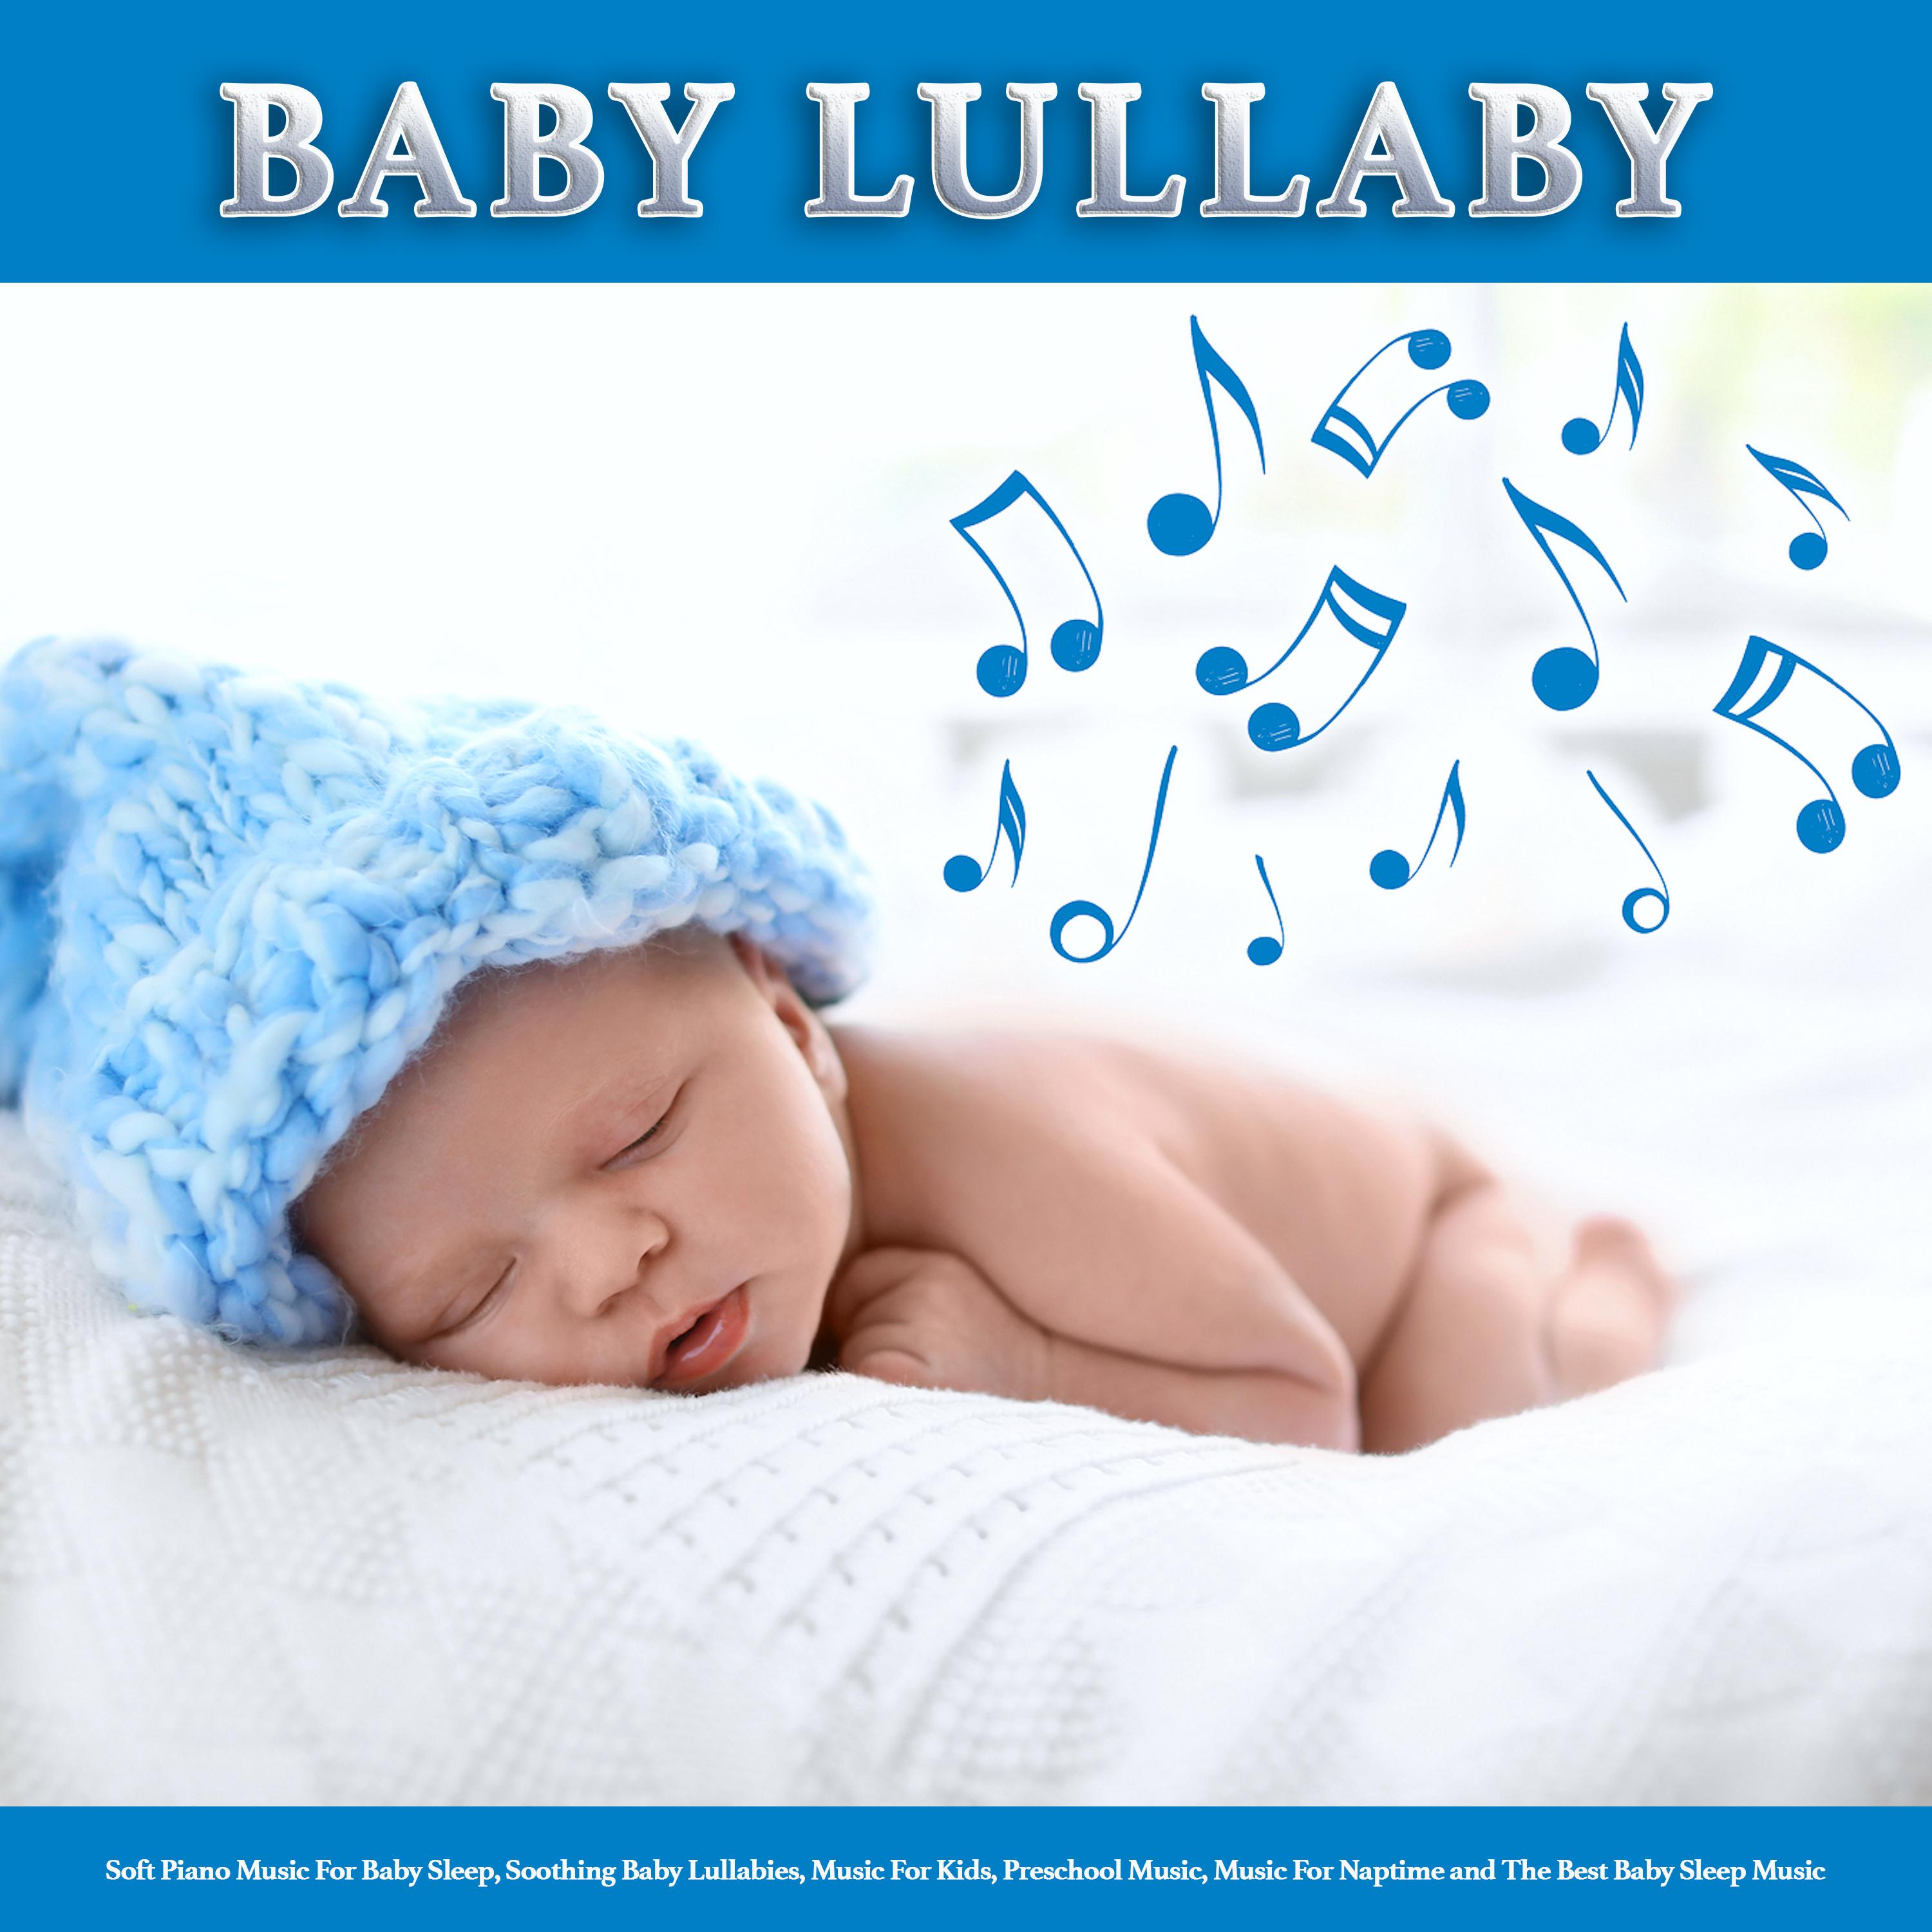 Baby Lullaby: Soft Piano Music For Baby Sleep, Soothing Baby Lullabies, Music For Kids, Preschool Music, Music For Naptime and The Best Baby Sleep Music